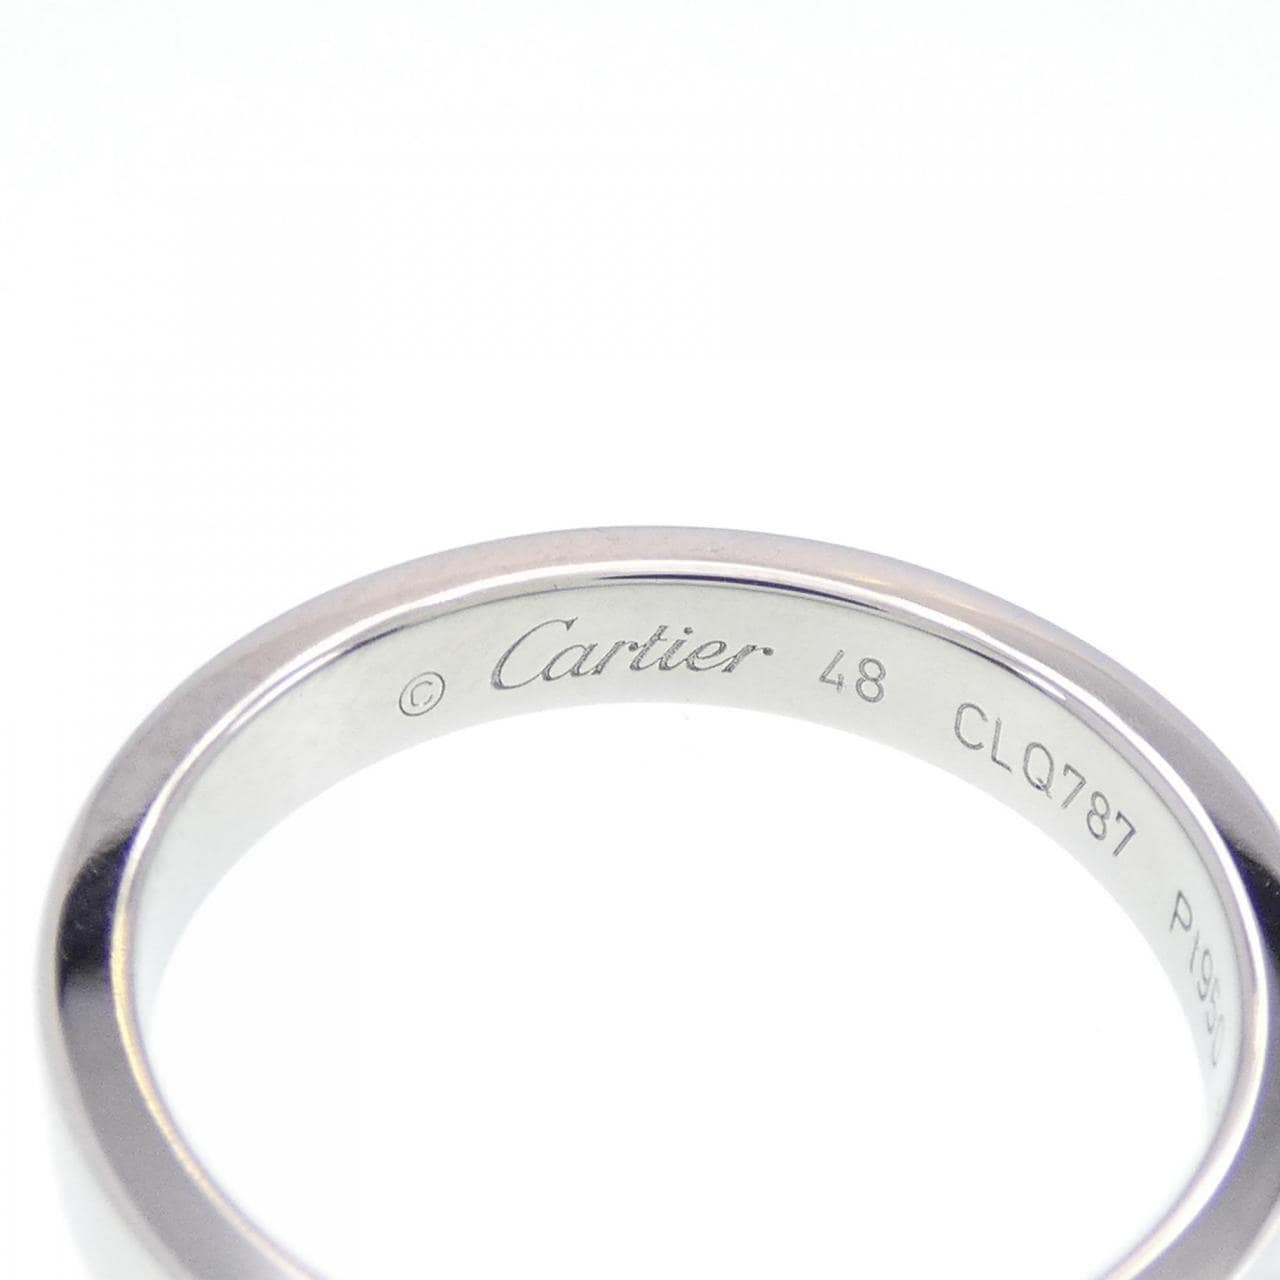 Cartier engraved ring